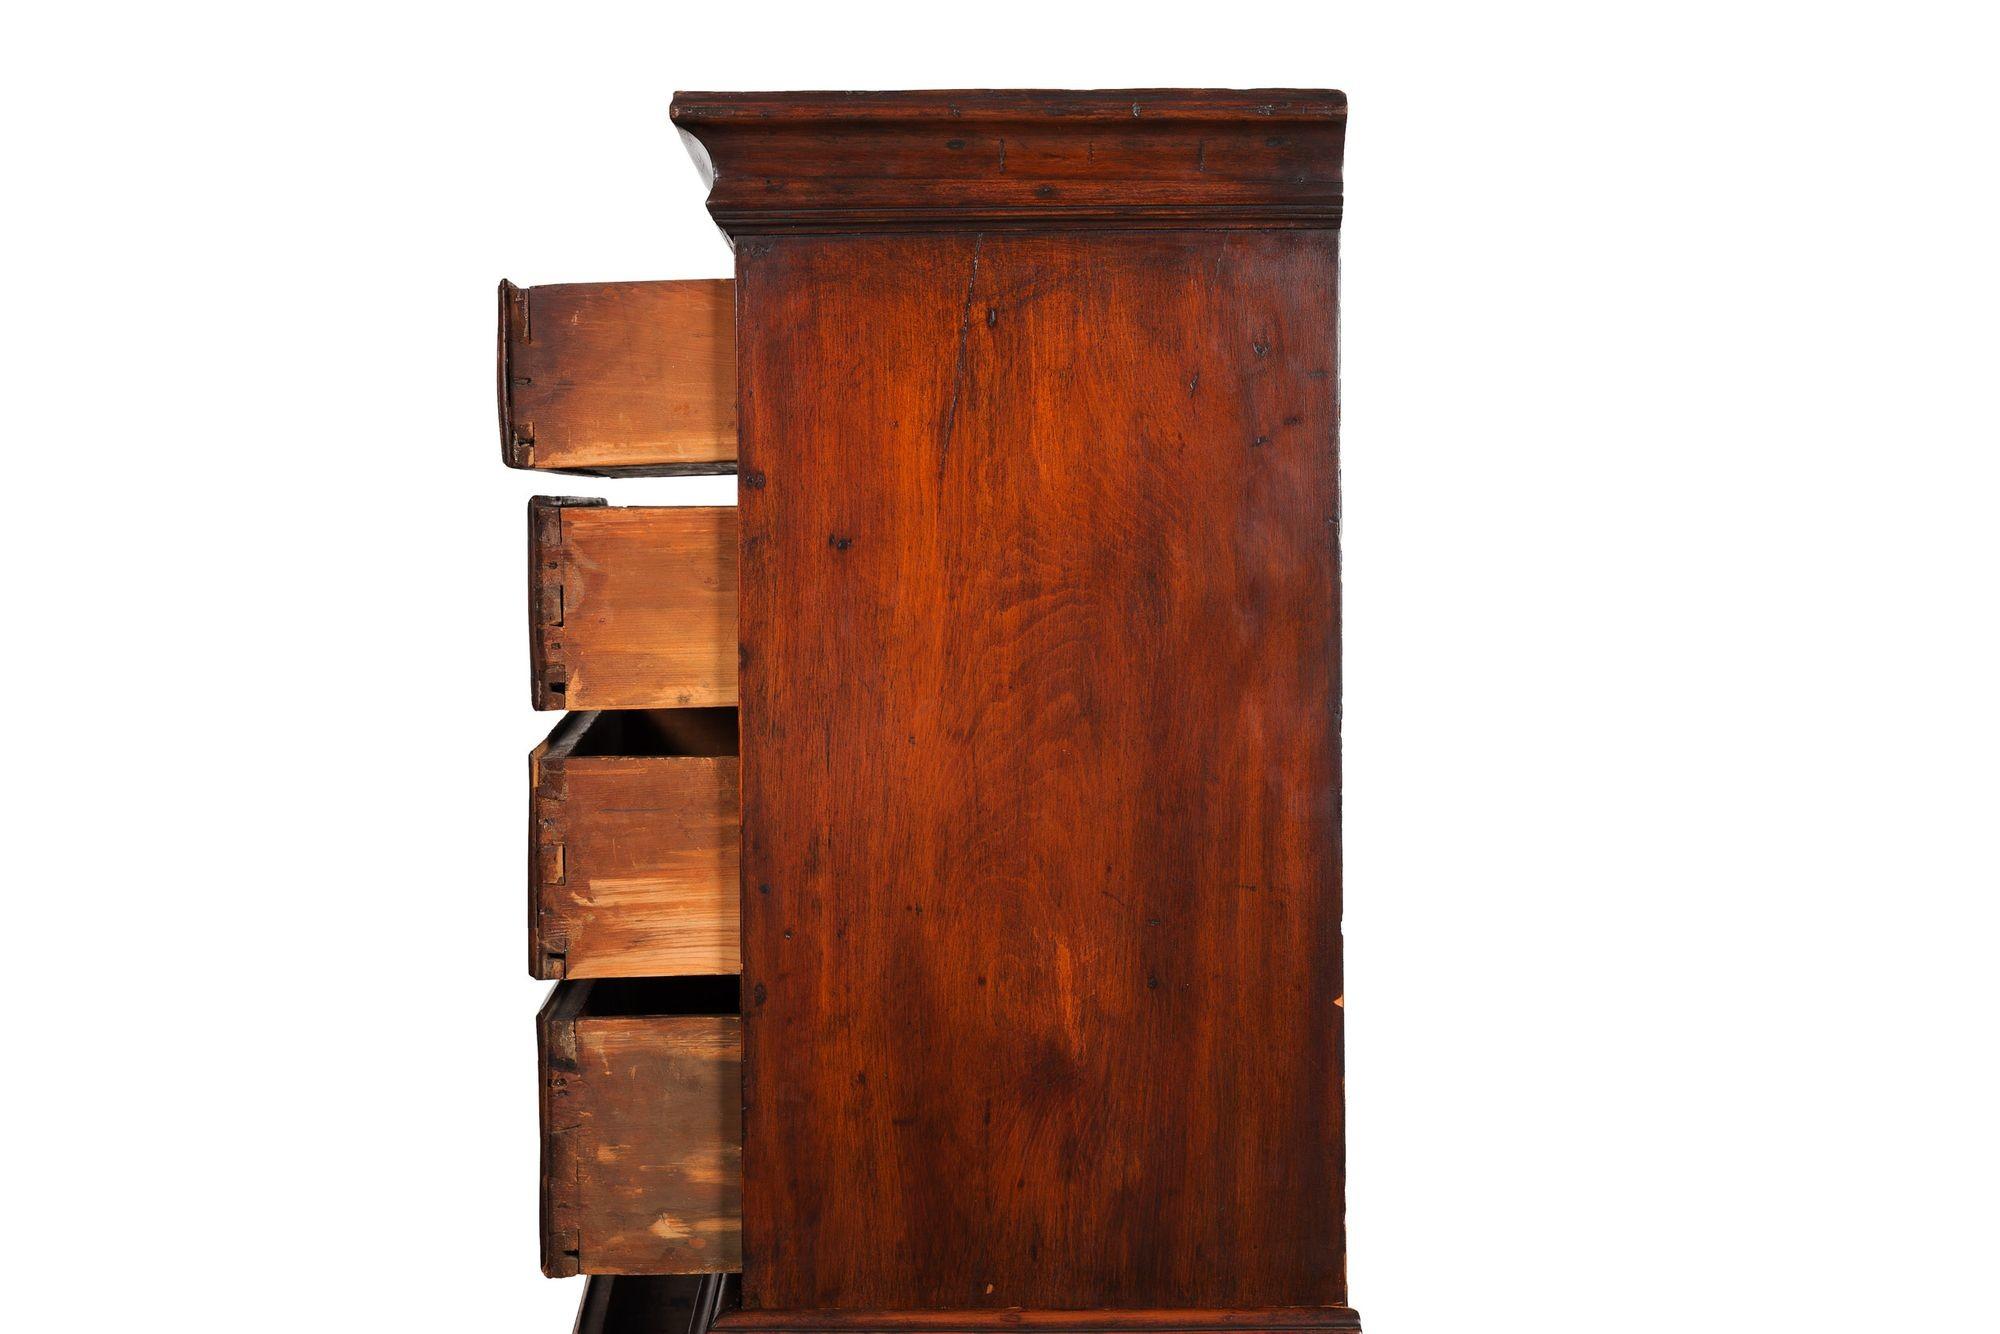 American Queen Anne Antique Sycamore Flat-Top Highboy, New England c. 1760 For Sale 1